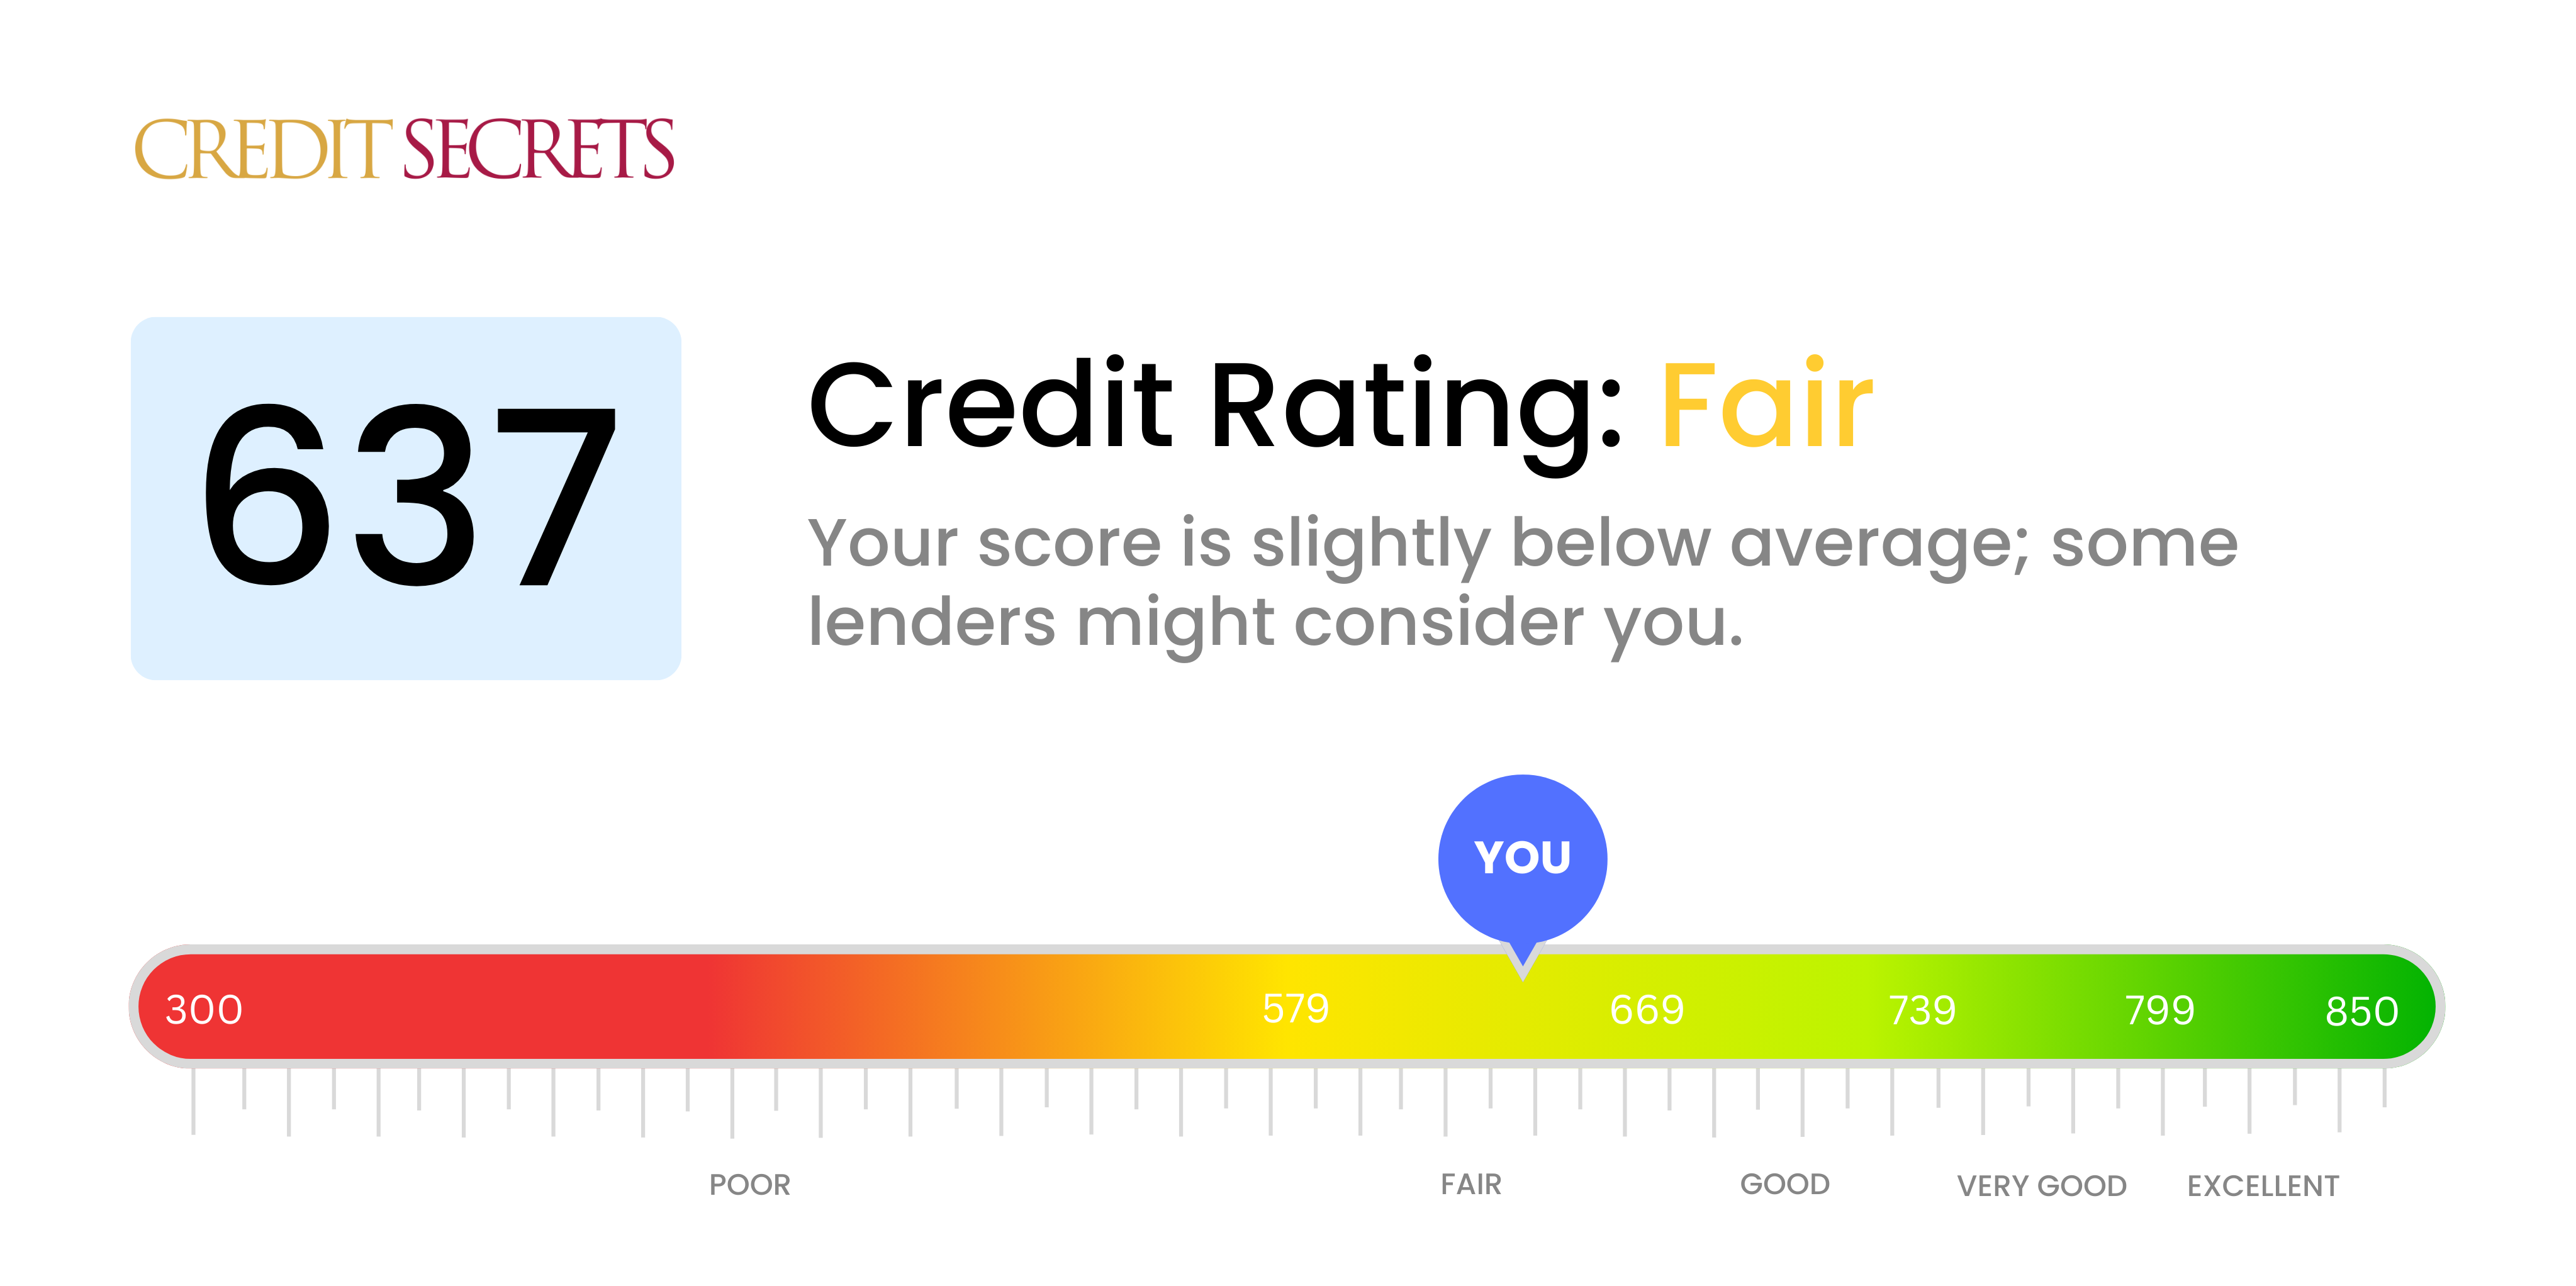 Is 637 a good credit score?